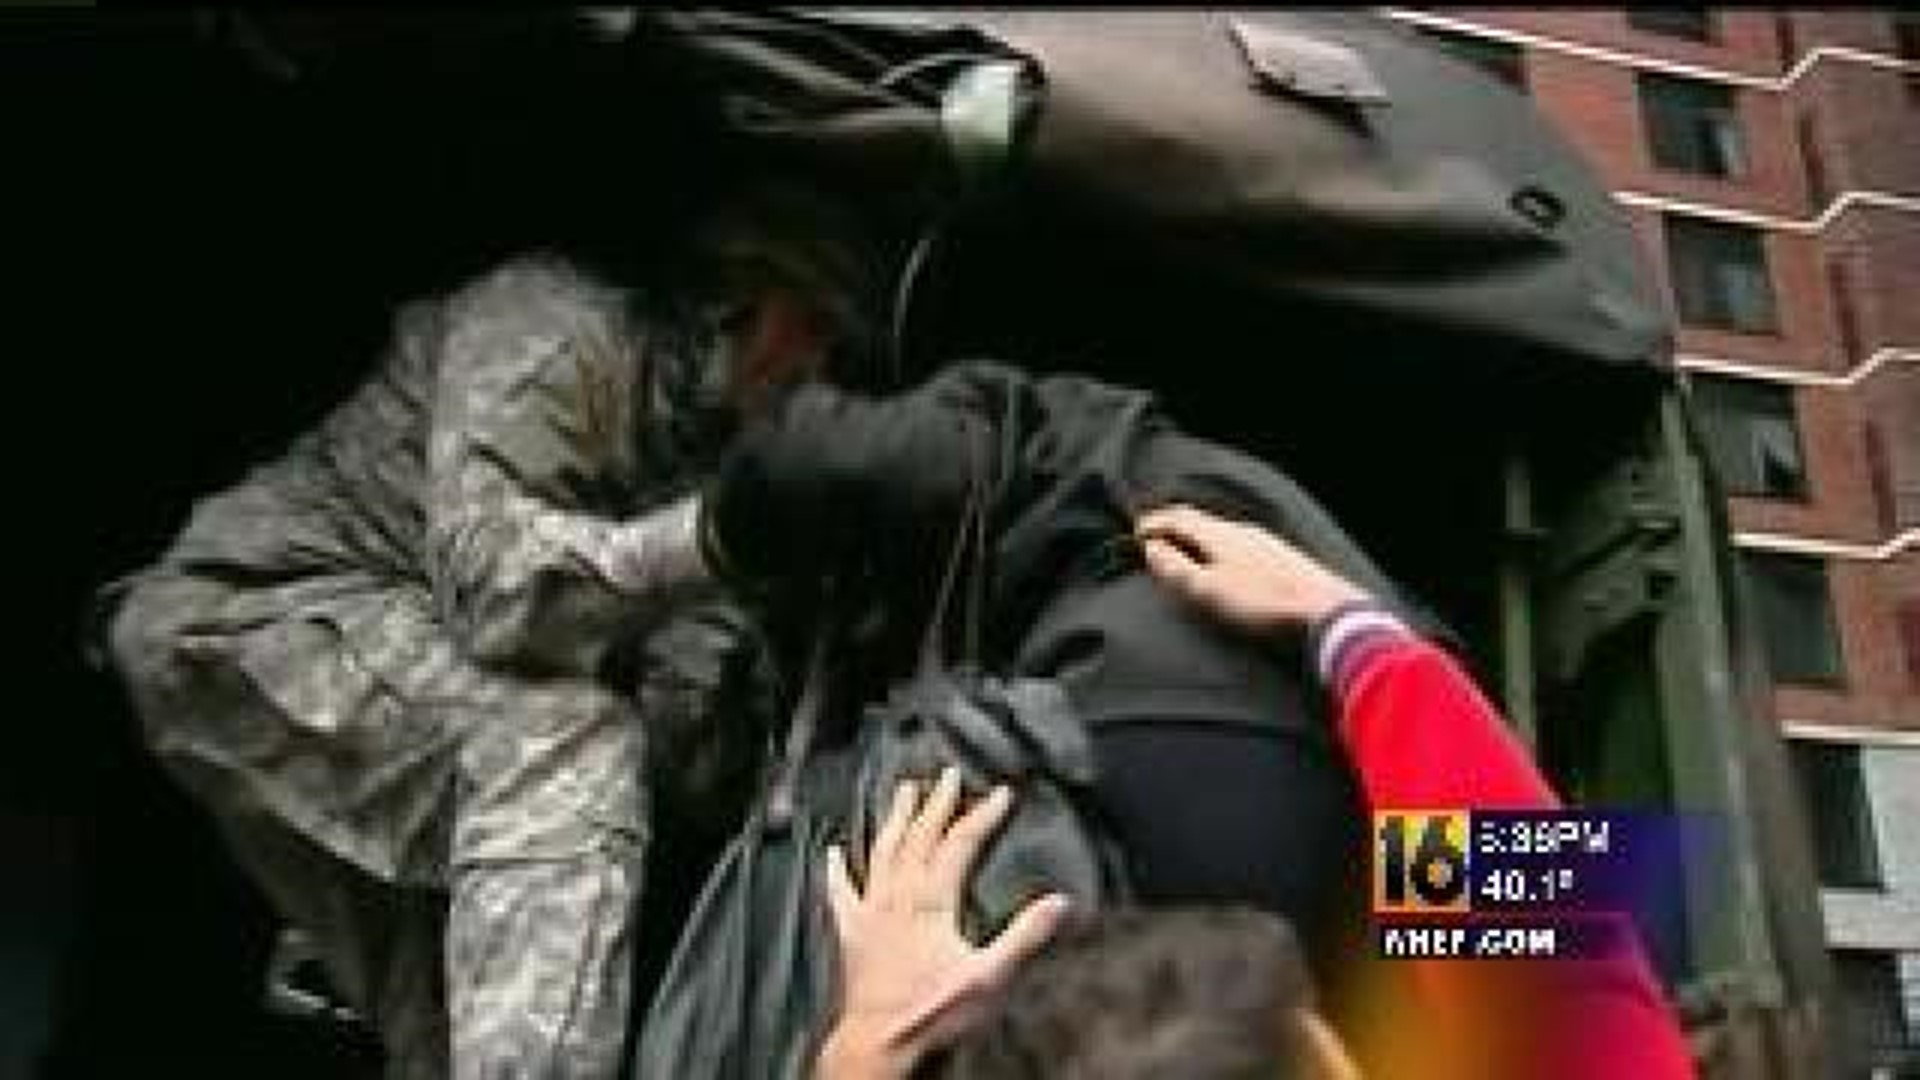 Local Help for NYC Sandy Victims